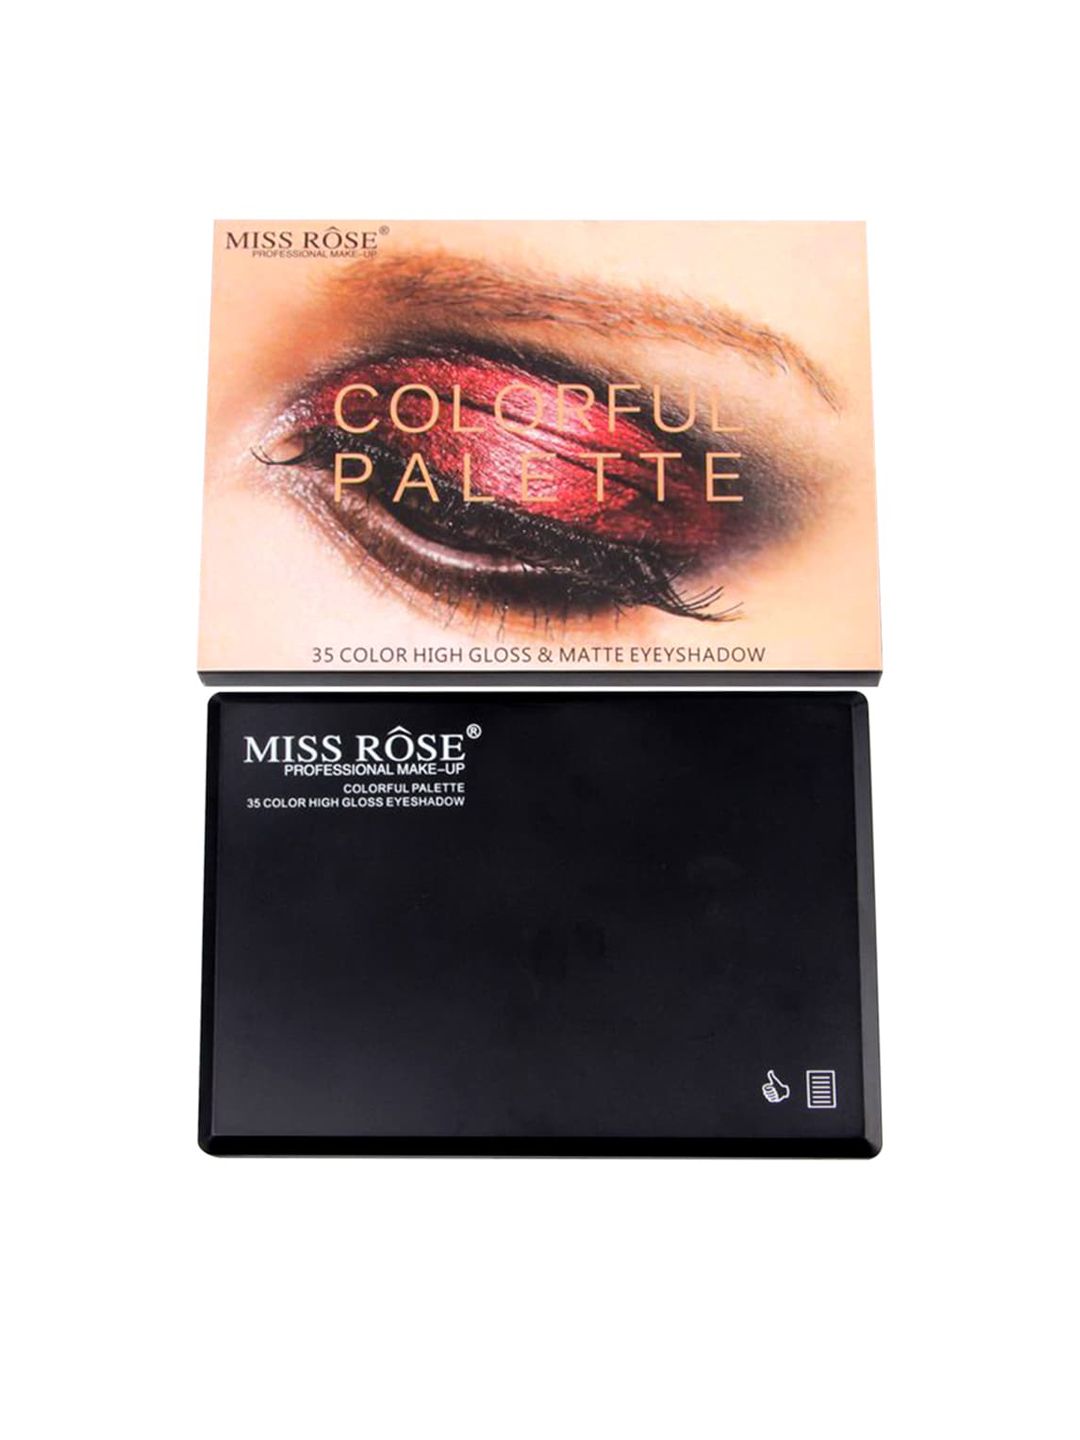 MISS ROSE High Gloss & Matte Colorful Eyeshadow Palette Price in India